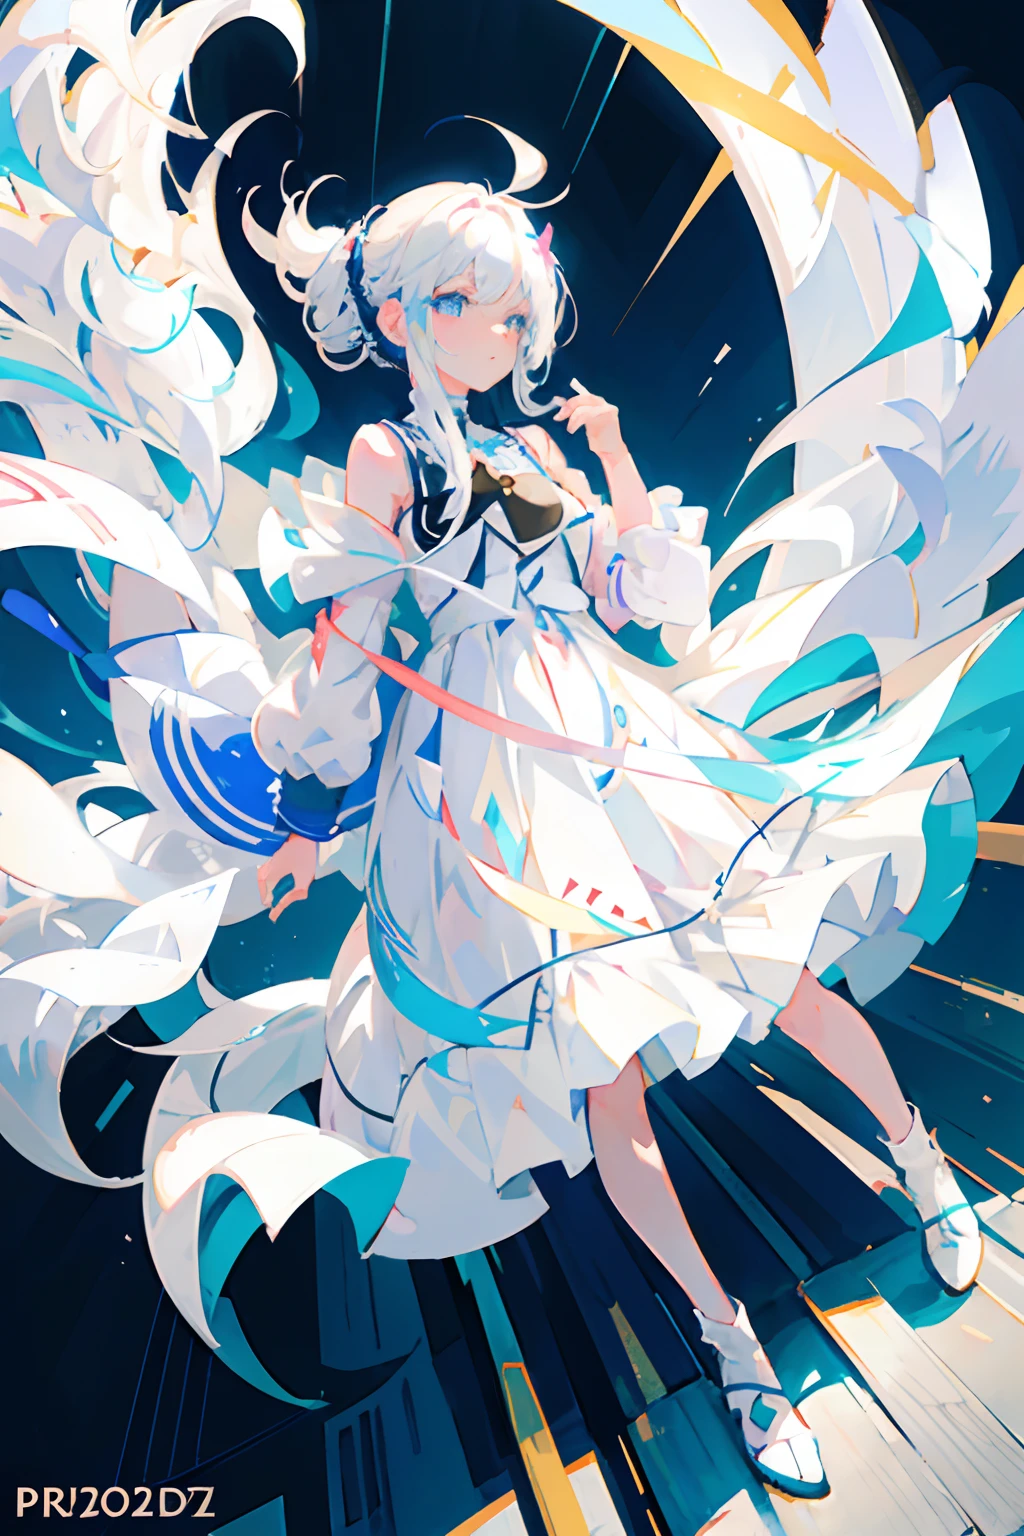 Anime girl with white hair and blue eyes in a white dress, white haired god, Digital art at Pixiv, White Dress!! of silver hair, Trending in ArtStation pixiv, guweiz on pixiv artstation, zerochan art, Pixiv Contest Winner, guweiz on artstation pixiv, pixiv, beautiful anime artwork, official artwork